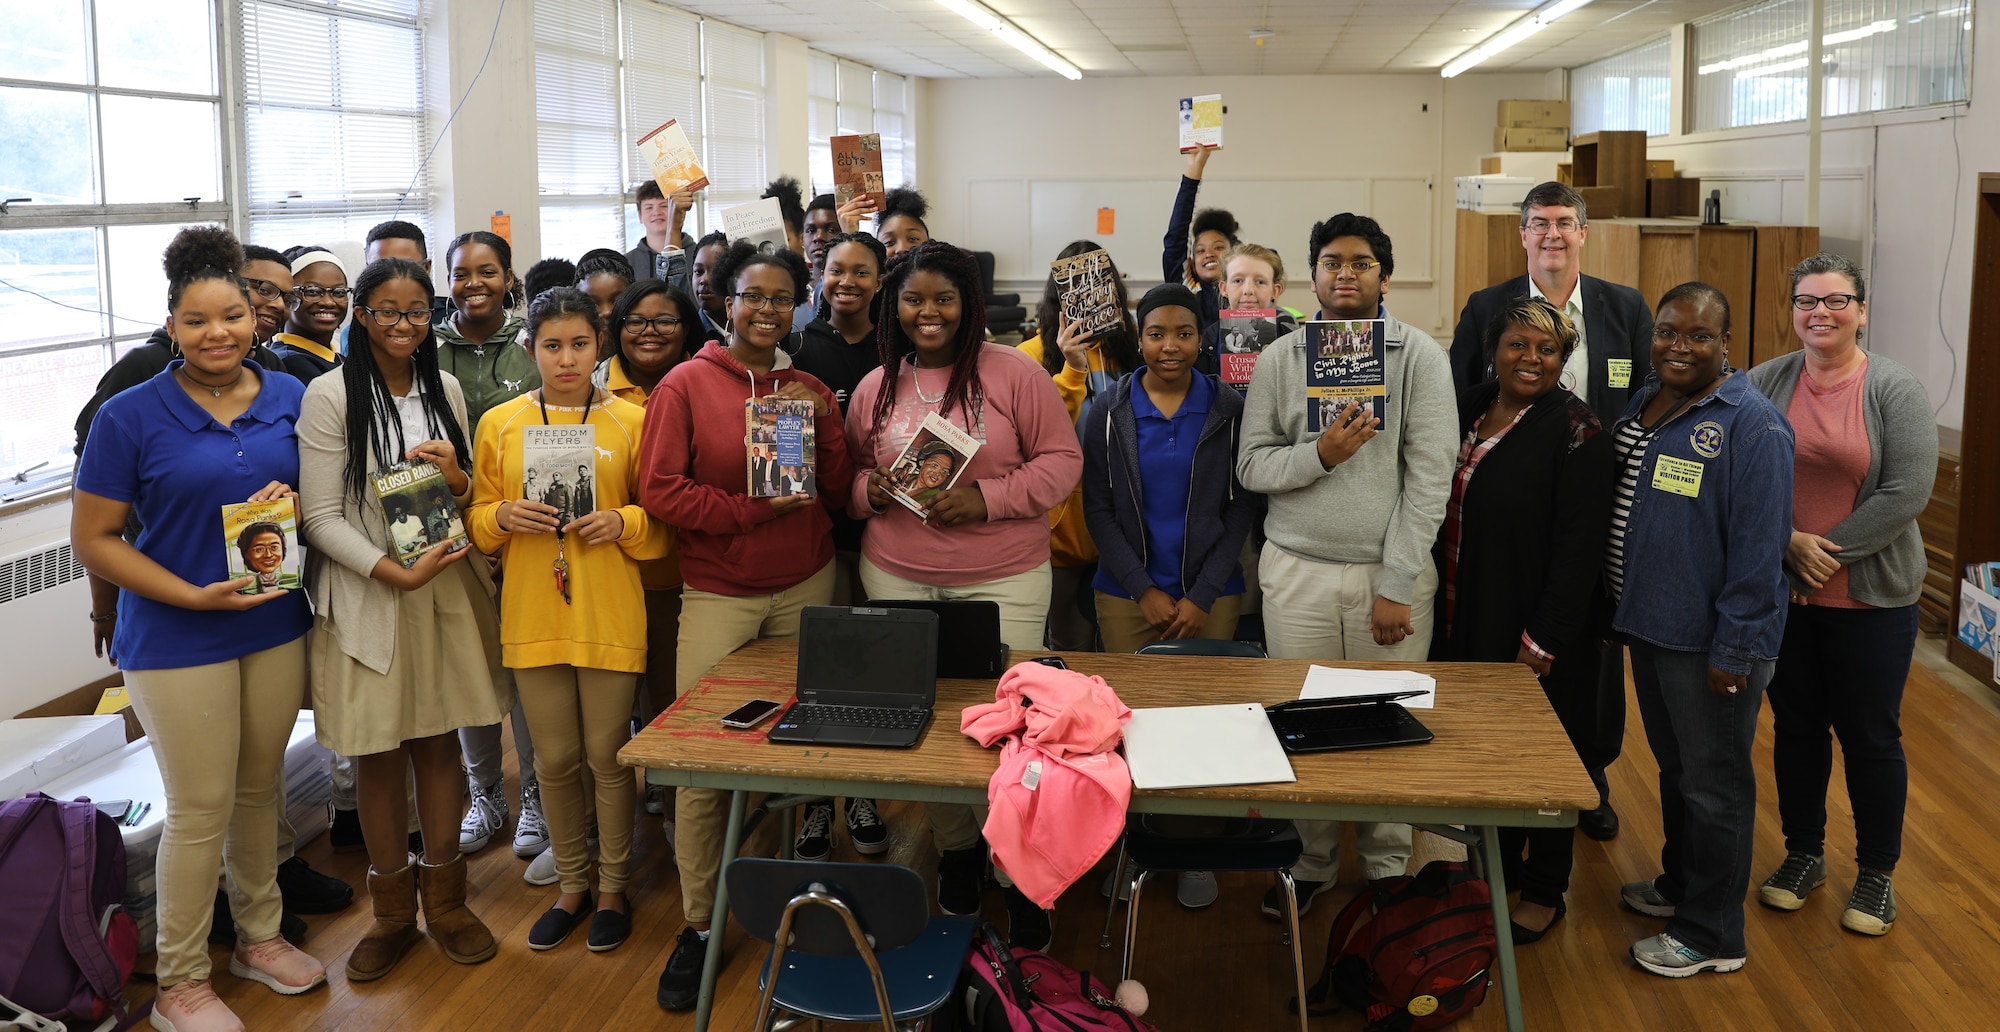 Students at Booker T. Washington Magnet High School receive some of the books donated by the Muir S. Fairchild Research Information Center. On right, Air University library staff Ataya Wallace, Mehmed Ali, Monica Tolver with media specialist Jennifer Sanford. (Courtesy Photo)